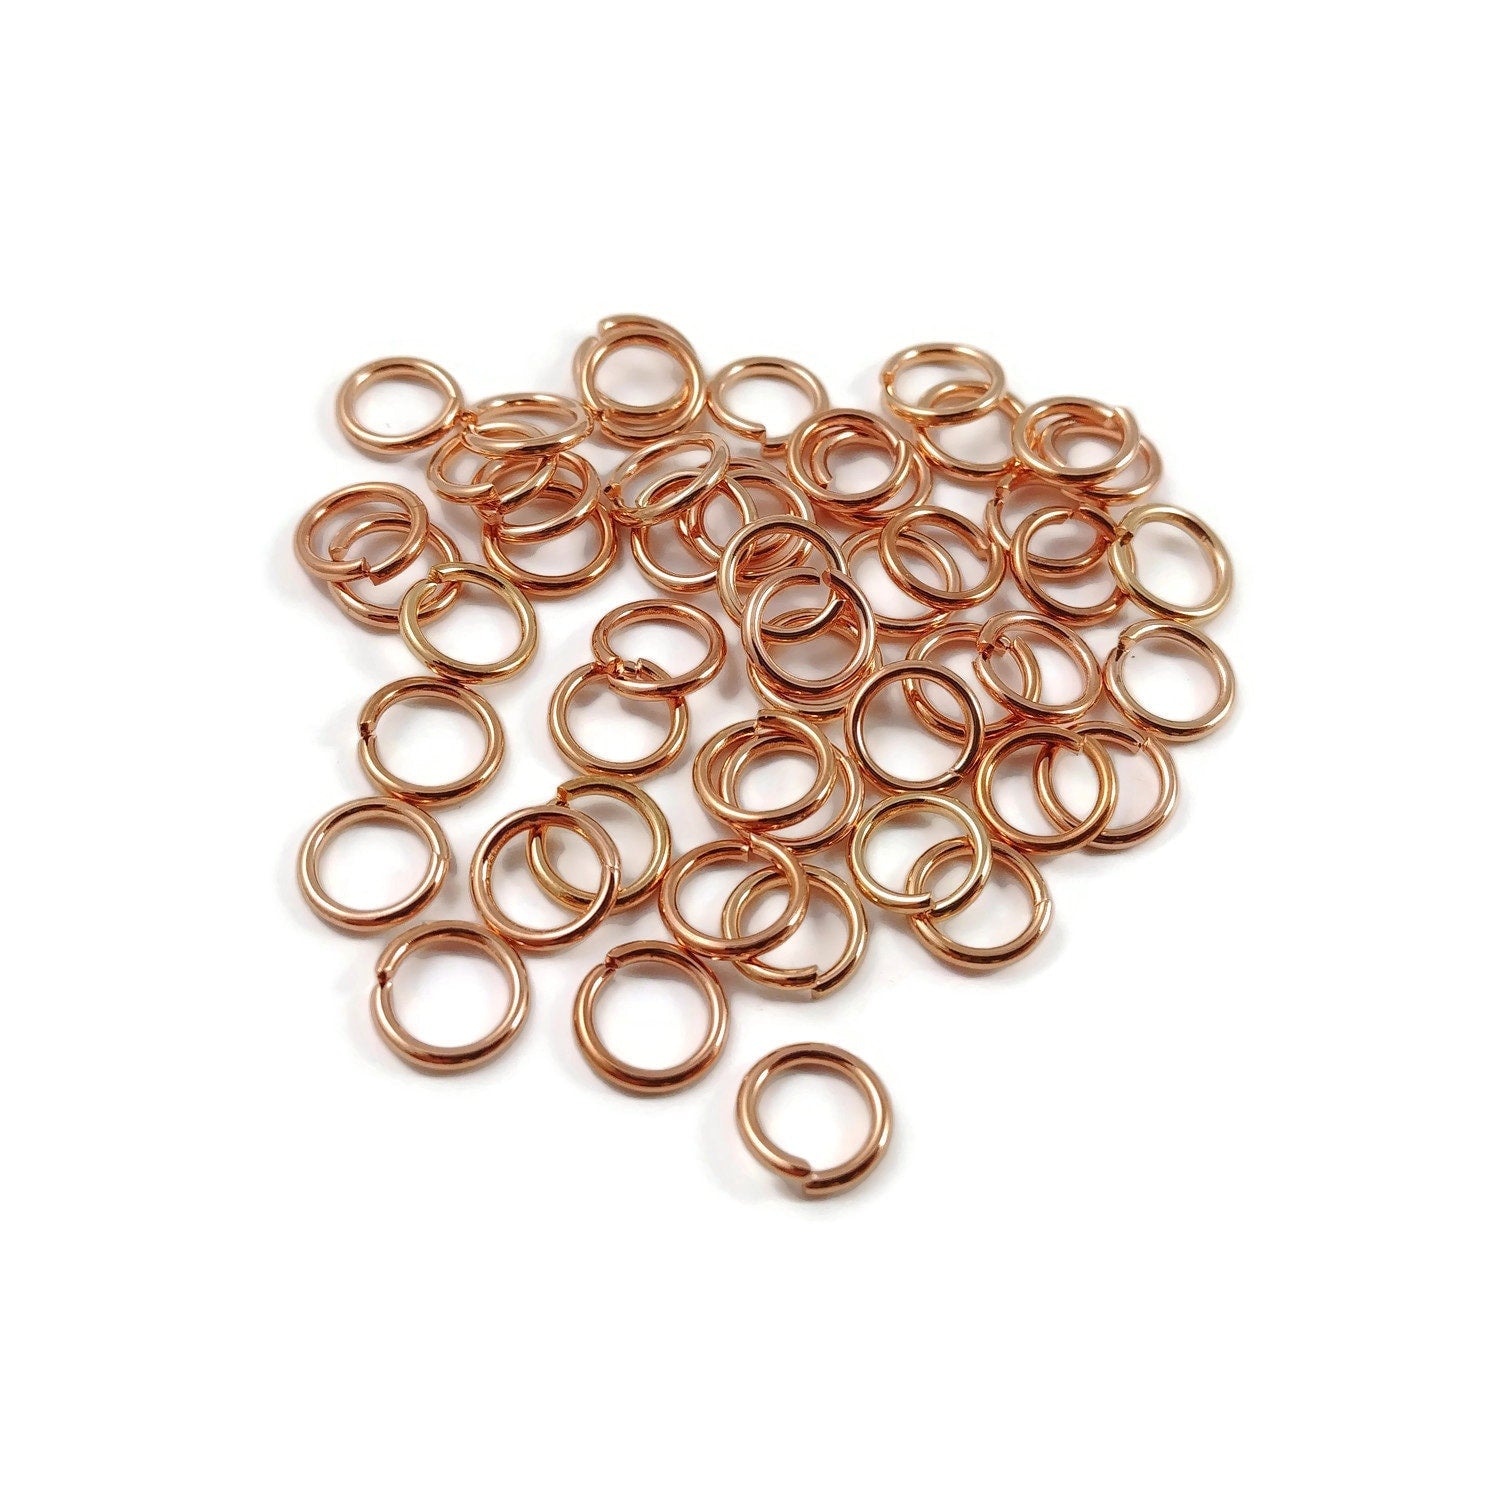 7mm Jump Rings 200pcs Stainless Steel Jump Rings for Jewelry